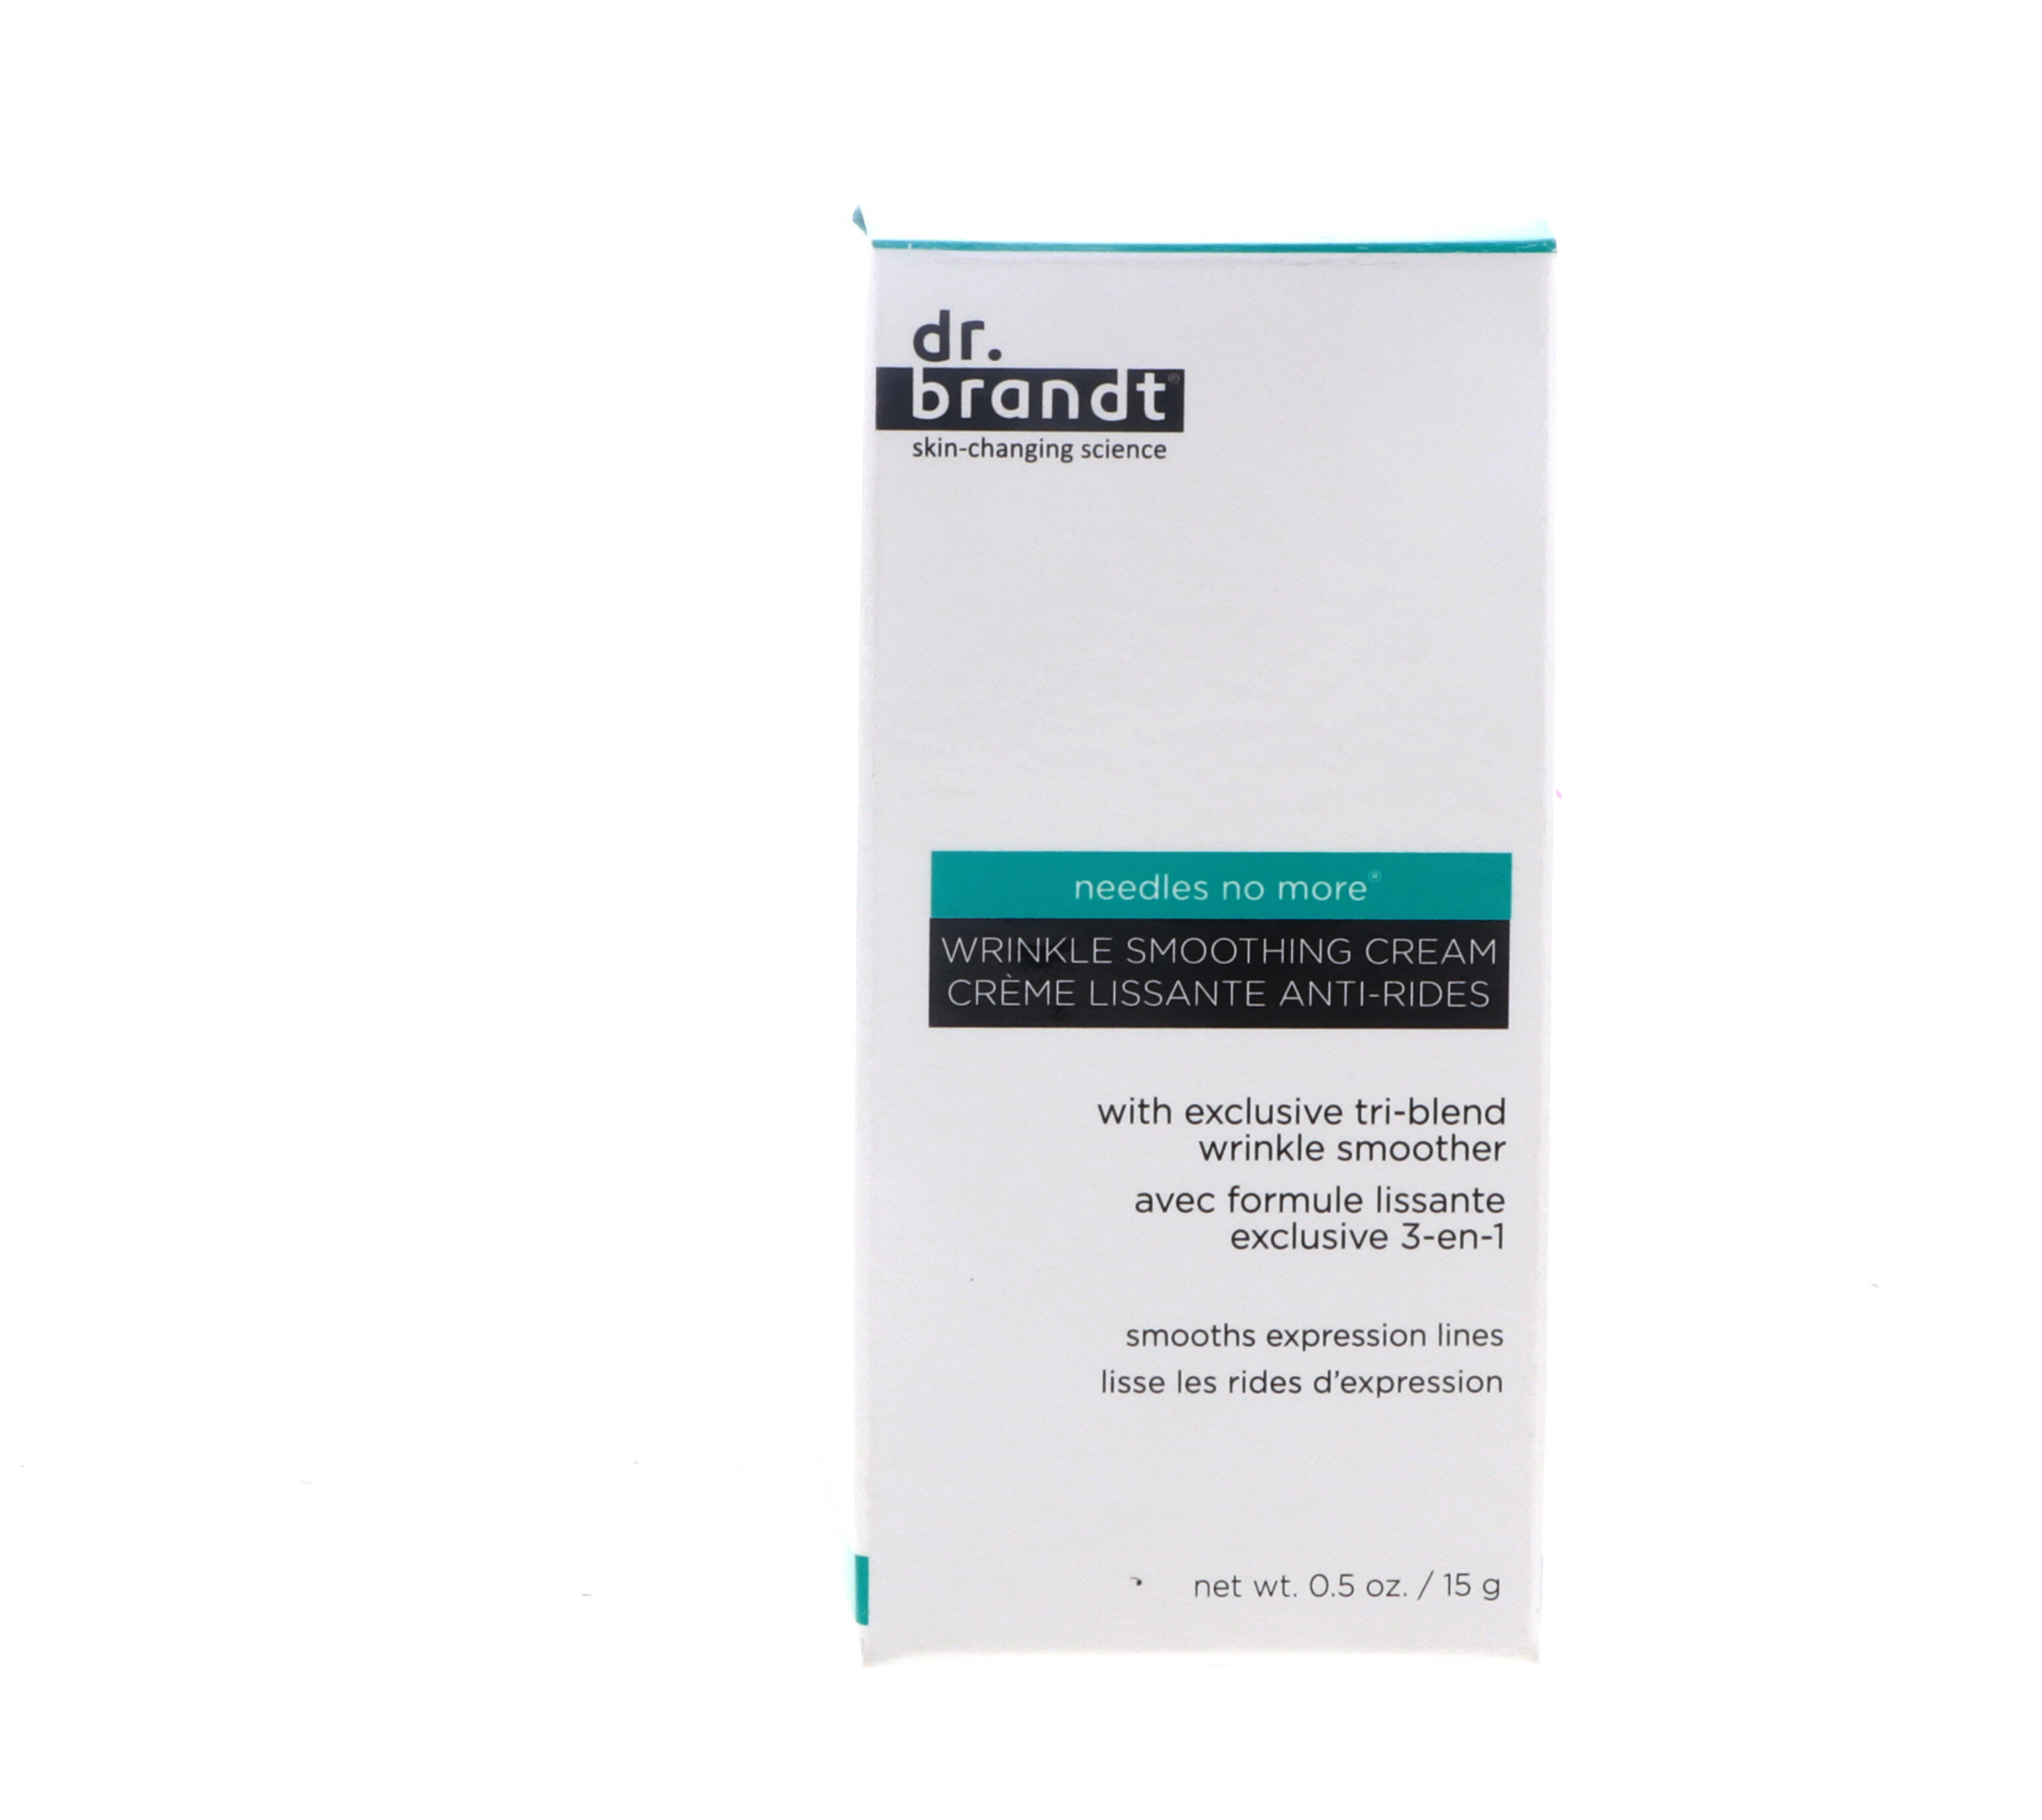 Dr. Brandt Needles No More Instant Wrinkle Smoothing Cream 0.5oz. Skin  Treatment - Simpson Advanced Chiropractic & Medical Center